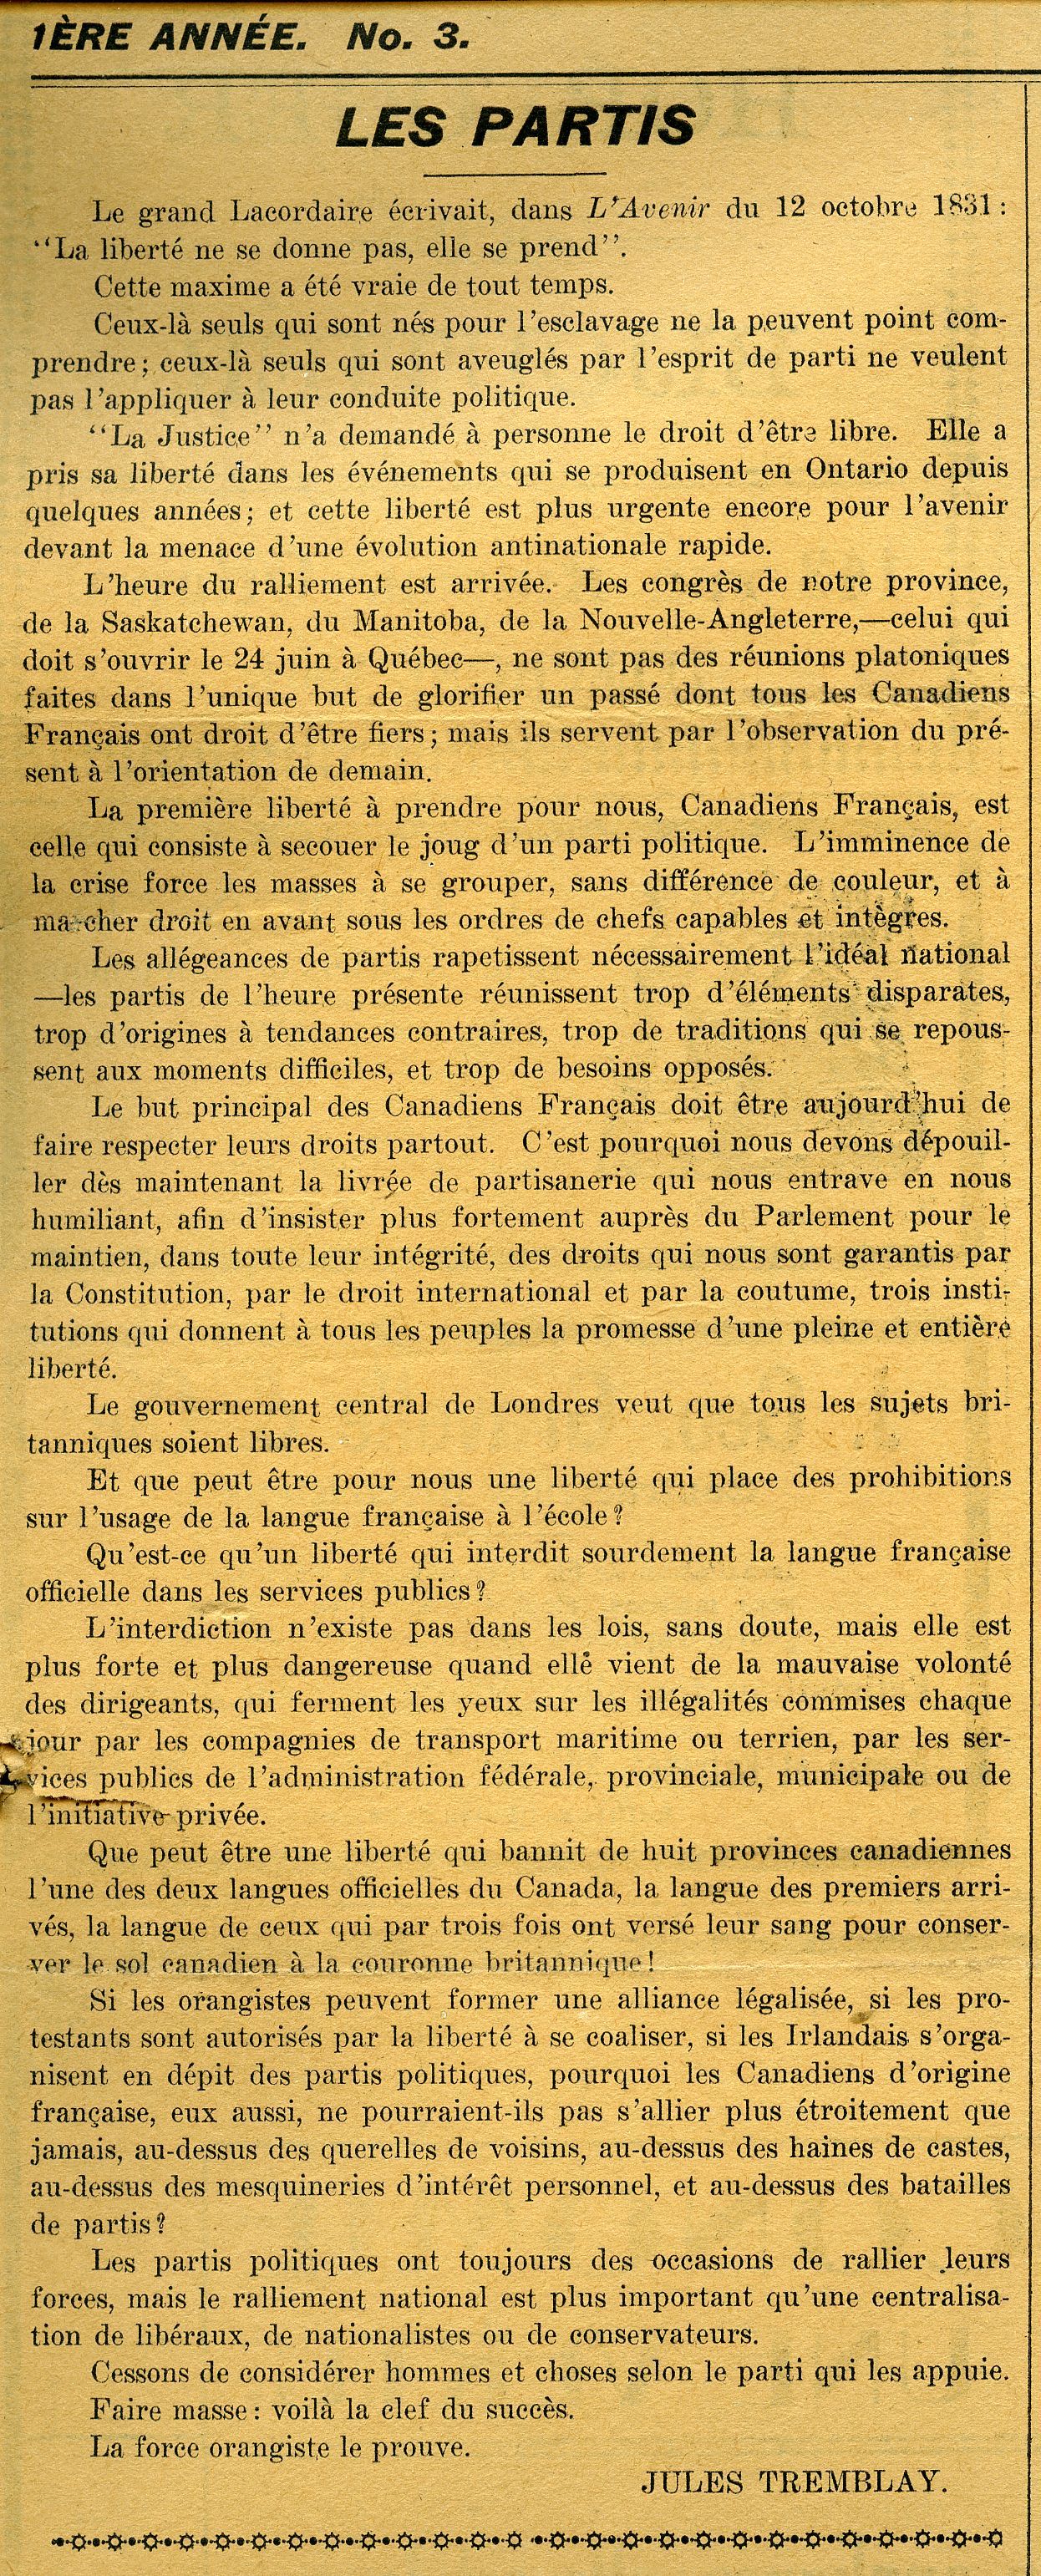 Newspaper article printed in French. The title appears in uppercase and bold, followed by the text, arranged in a single column. The article is signed. The paper is yellowed.